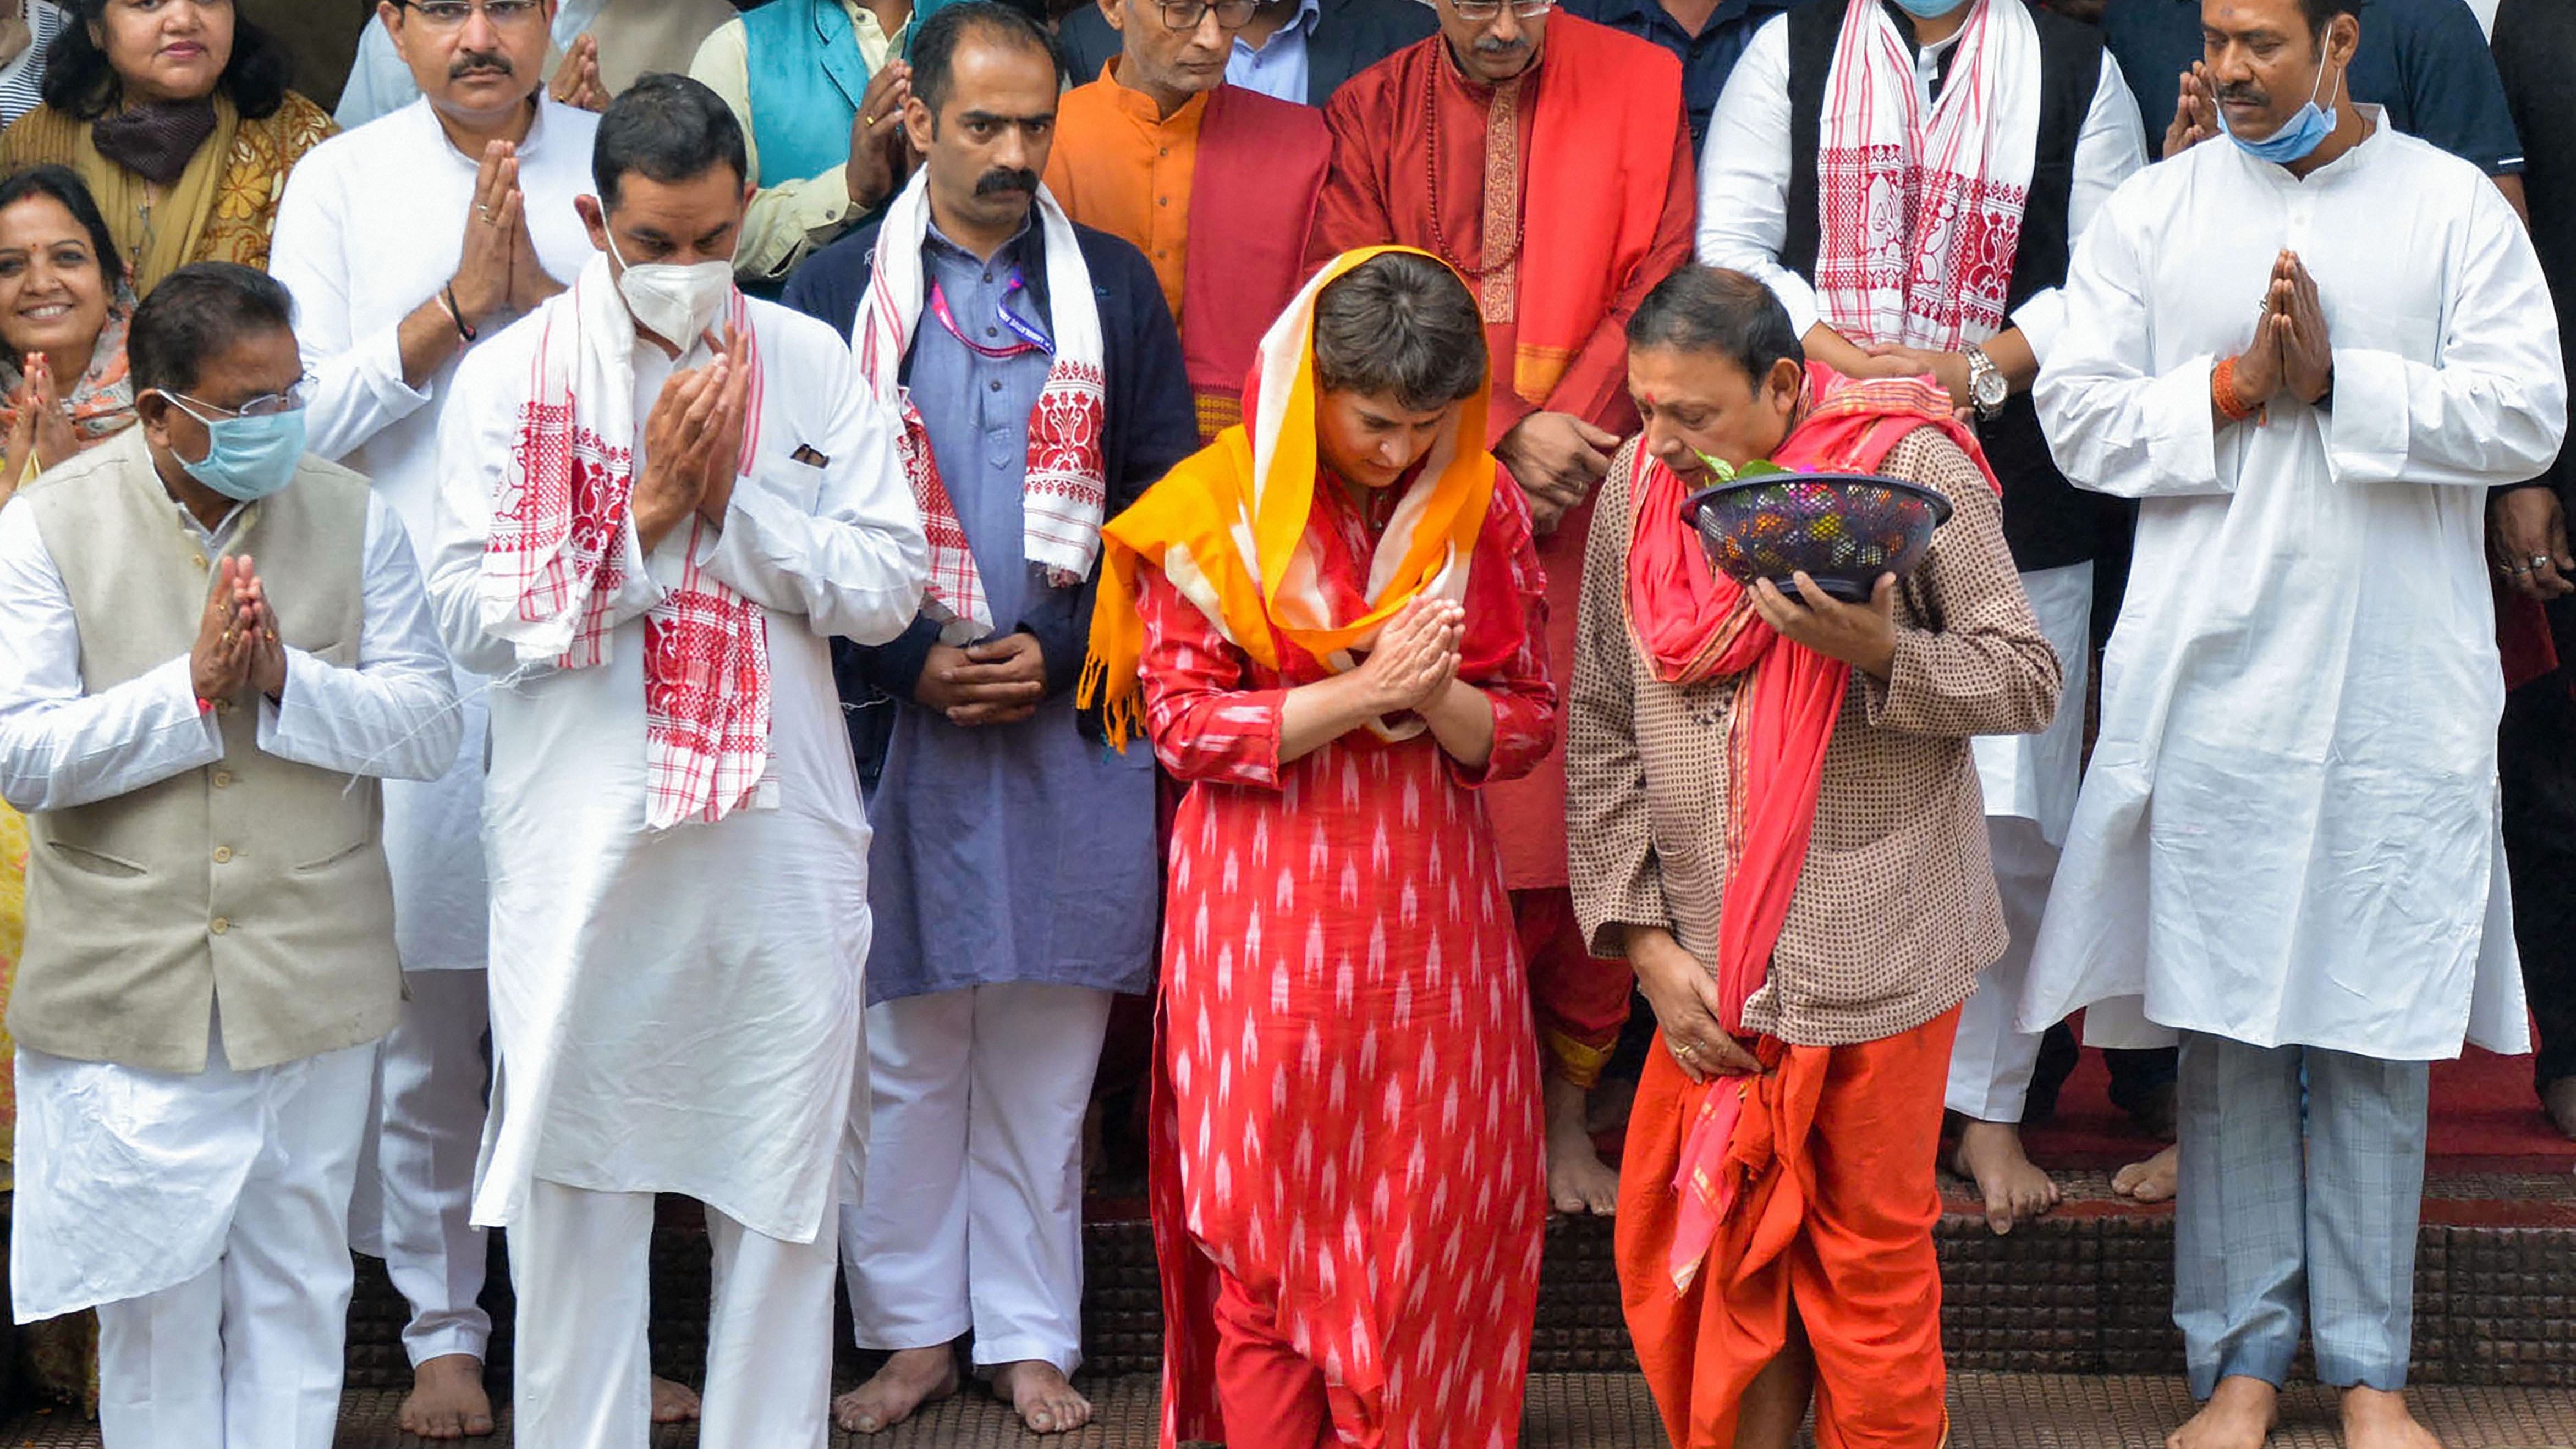 Priyanka is on a two-day visit to Assam as part of Congress's camapaign for the three-phase Assembly elections starting March 27 till April 6. Gandhi visited Kamakhya temple in Guwahati on Monday morning before visiting Lakhimpur. Credit: PTI